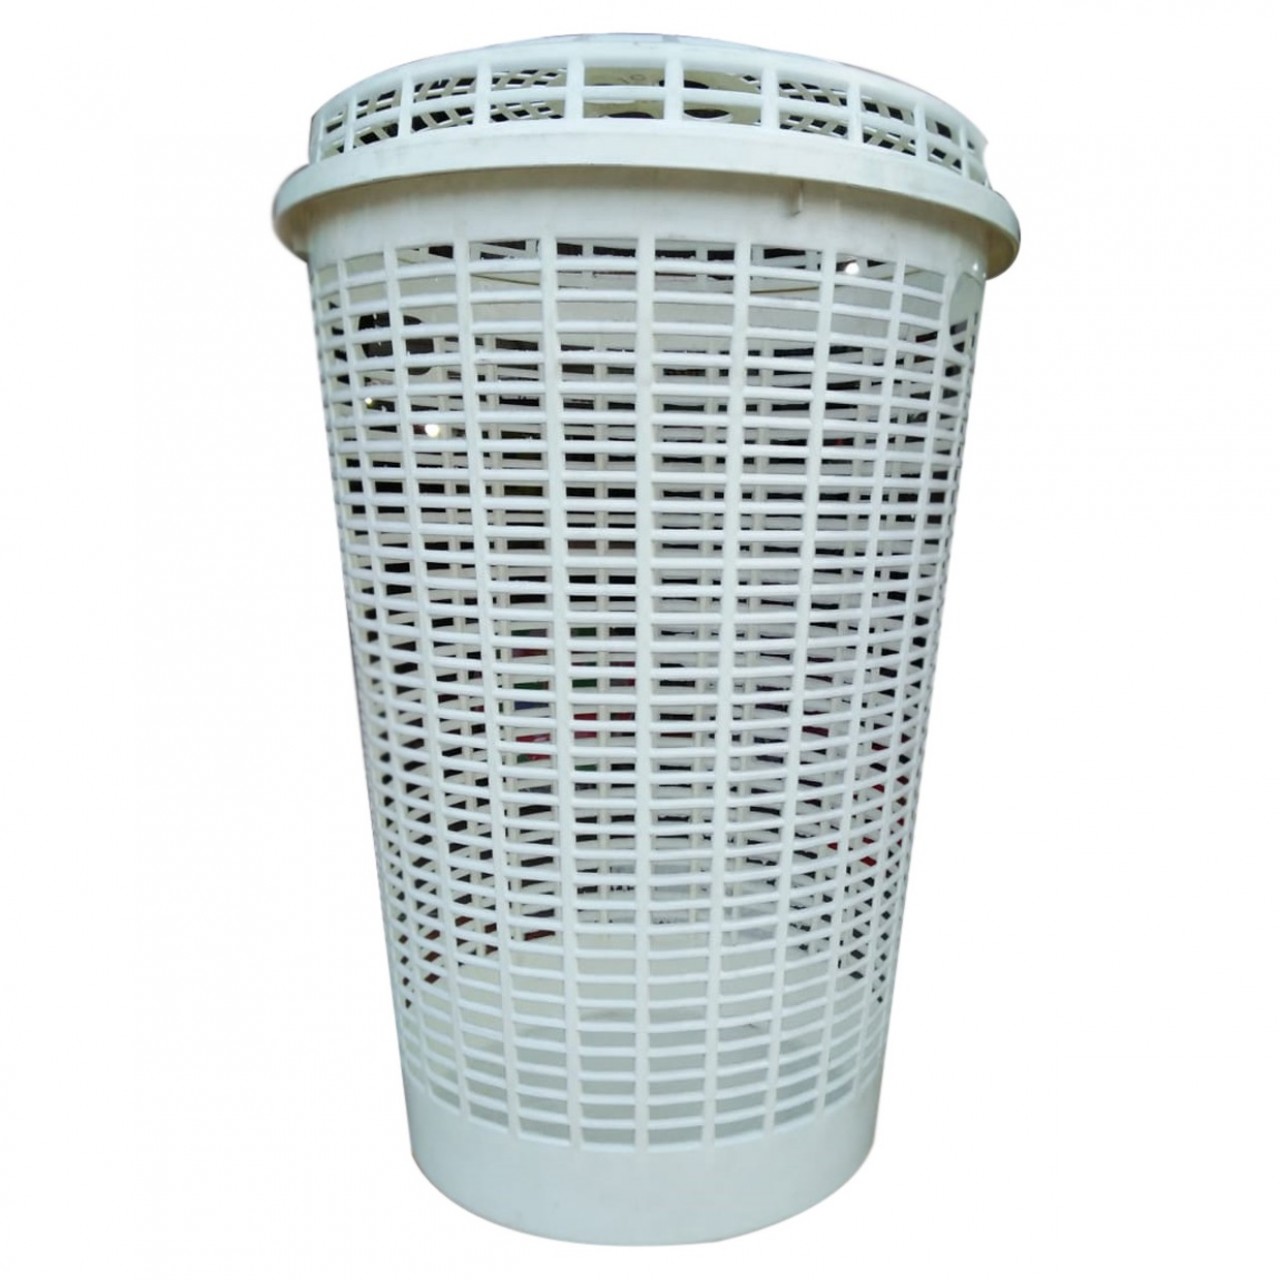 Plastic Basket With Top Lid For Storage